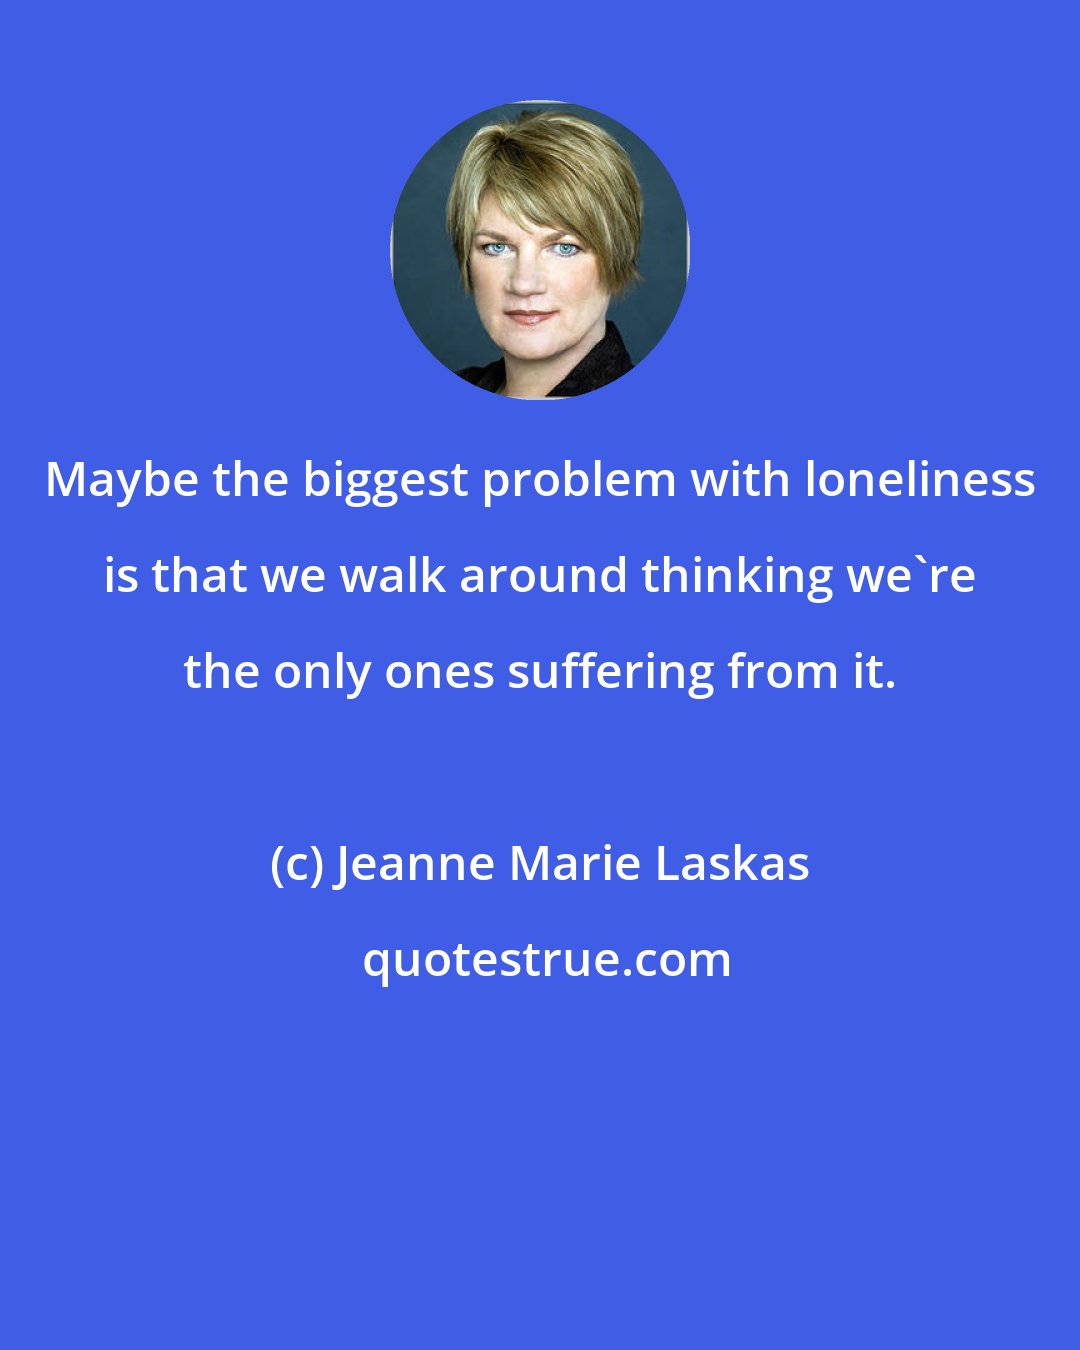 Jeanne Marie Laskas: Maybe the biggest problem with loneliness is that we walk around thinking we're the only ones suffering from it.